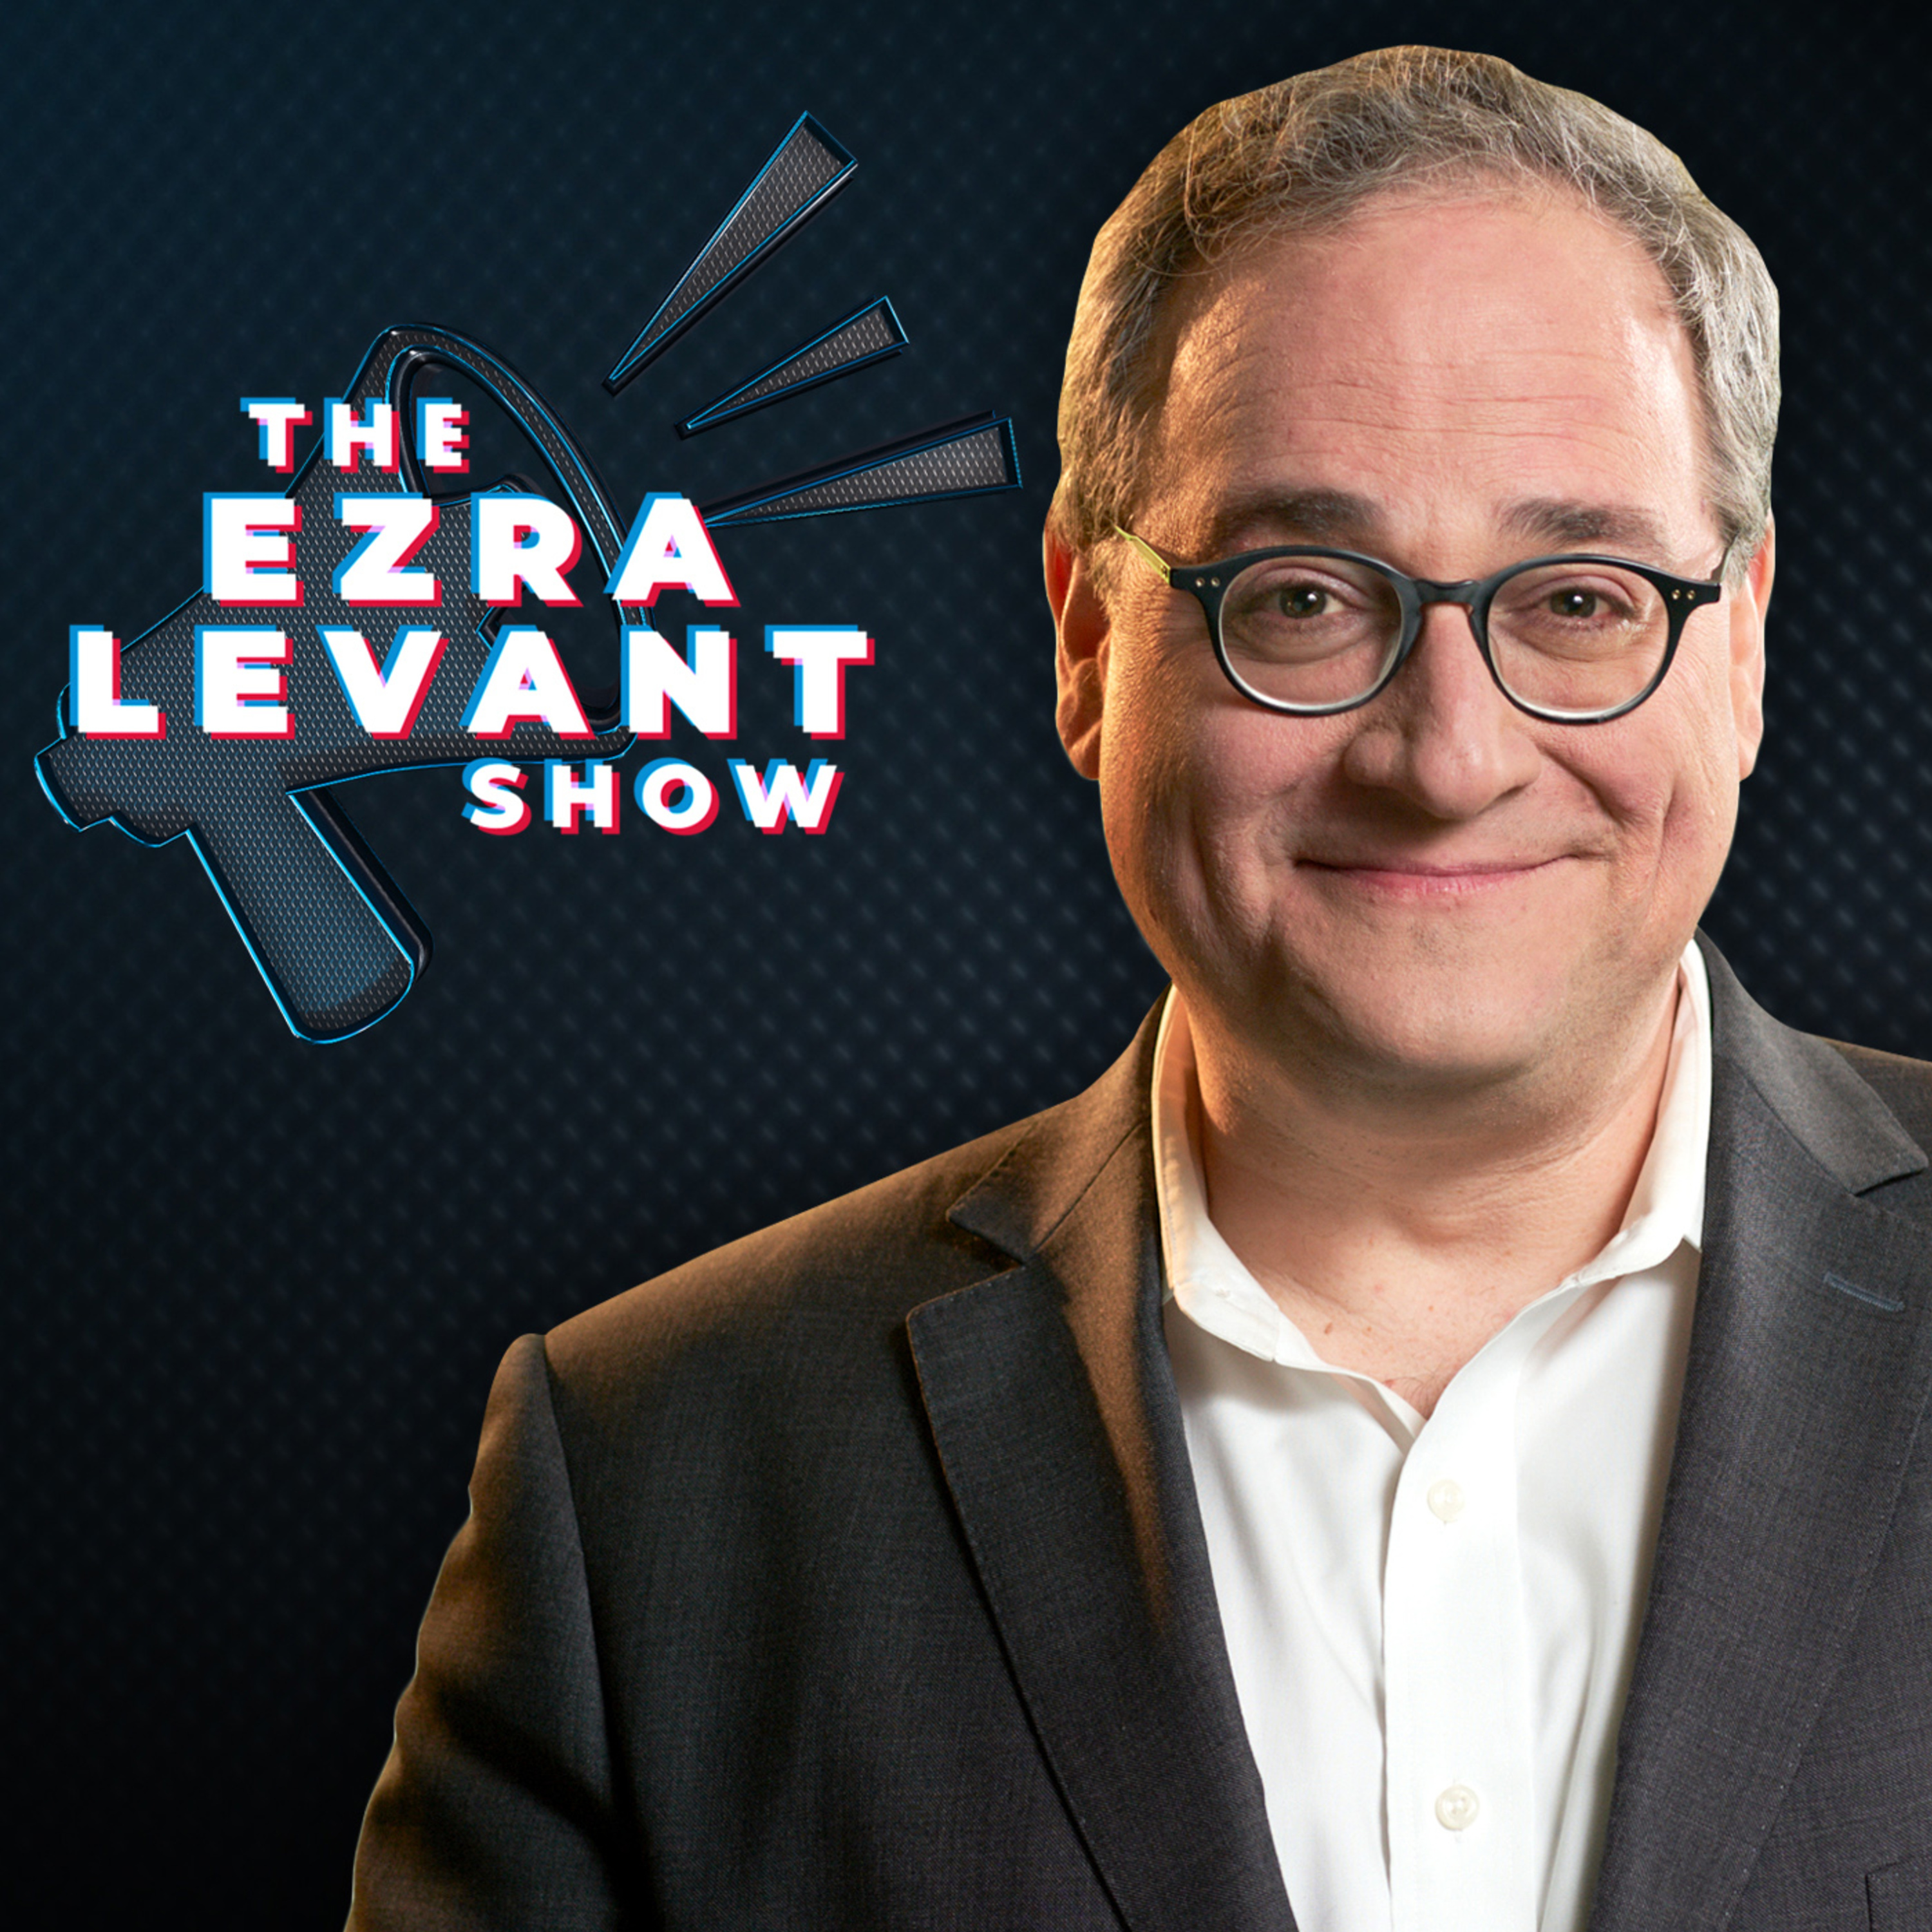 EZRA LEVANT | Trudeau’s CBC state broadcaster does their best to smear Elon Musk